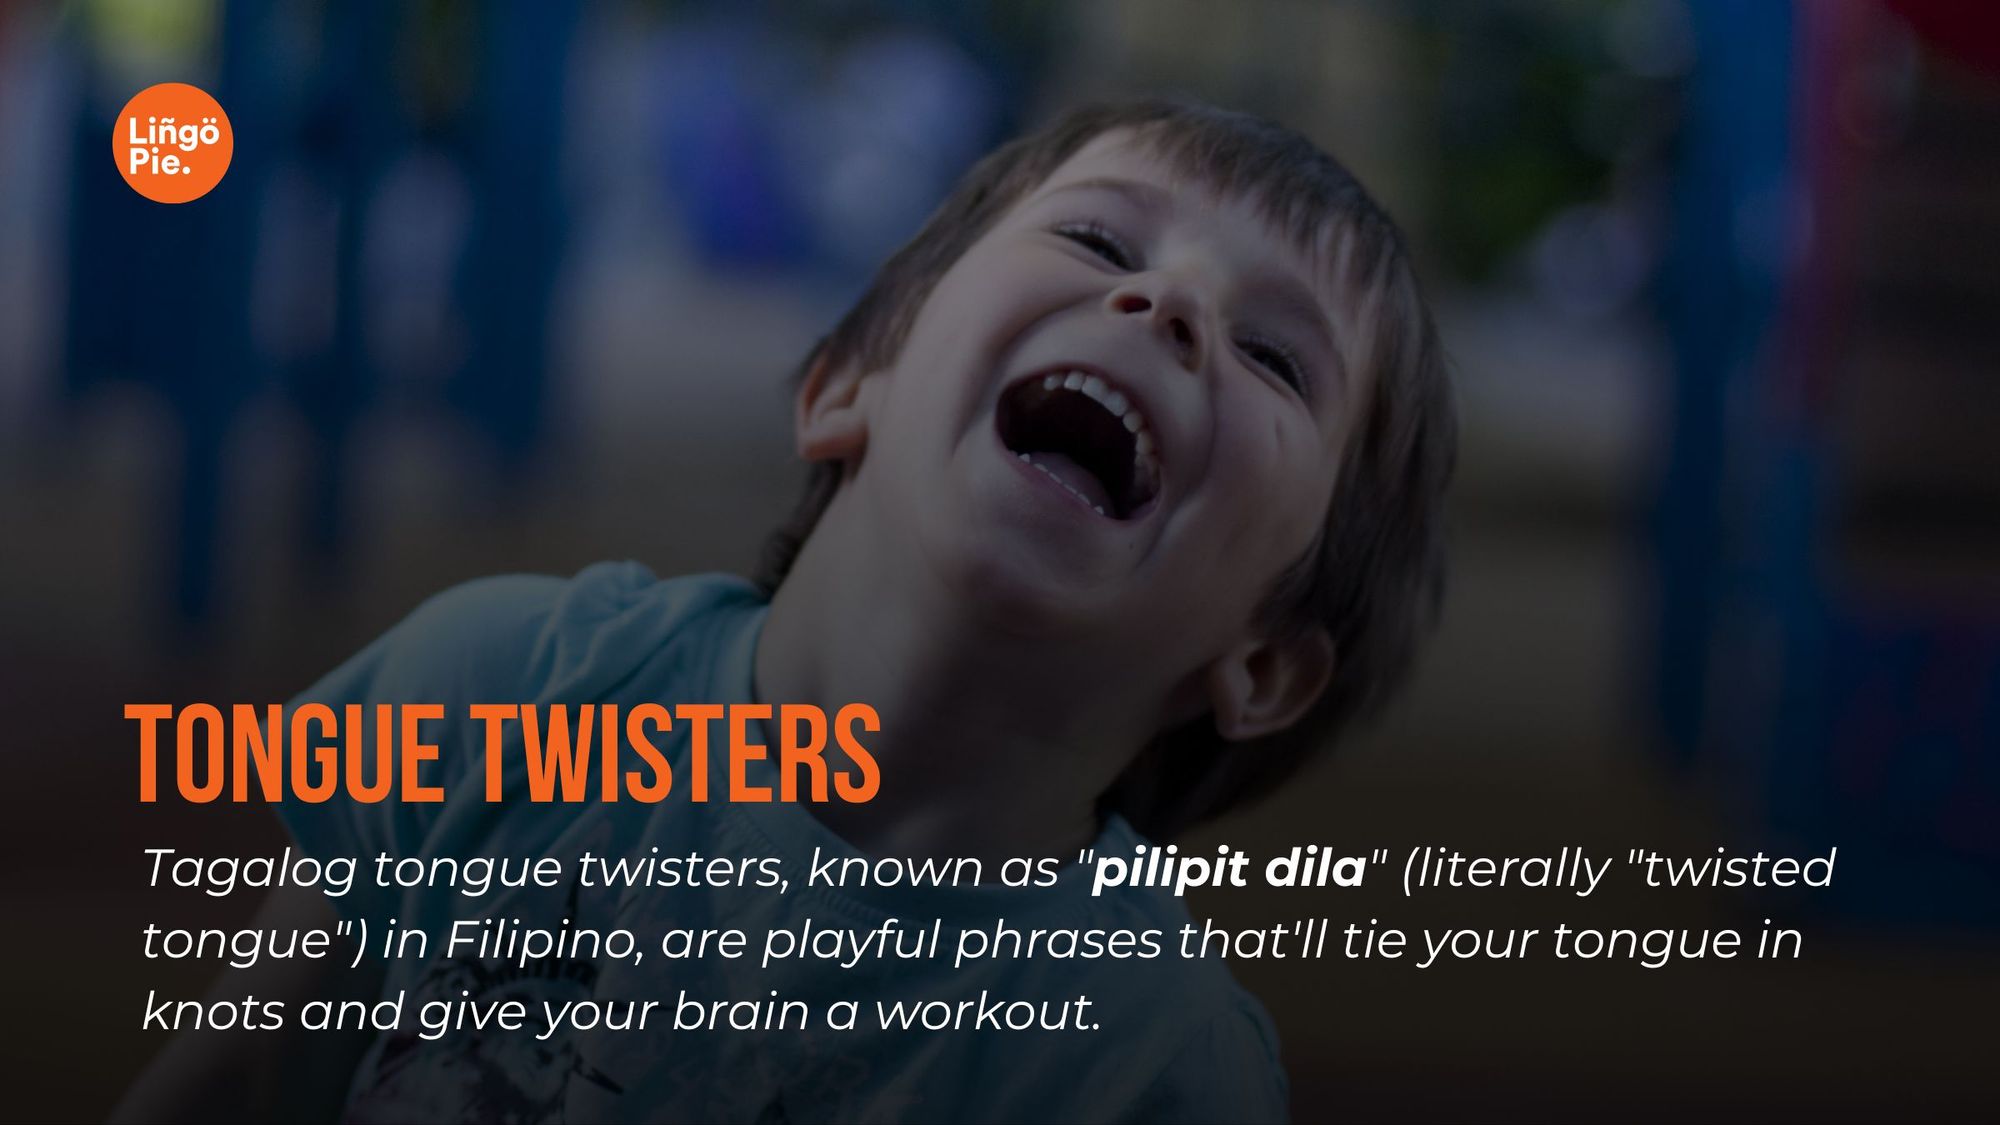 Tagalog Tongue Twisters are also called pilipit dila